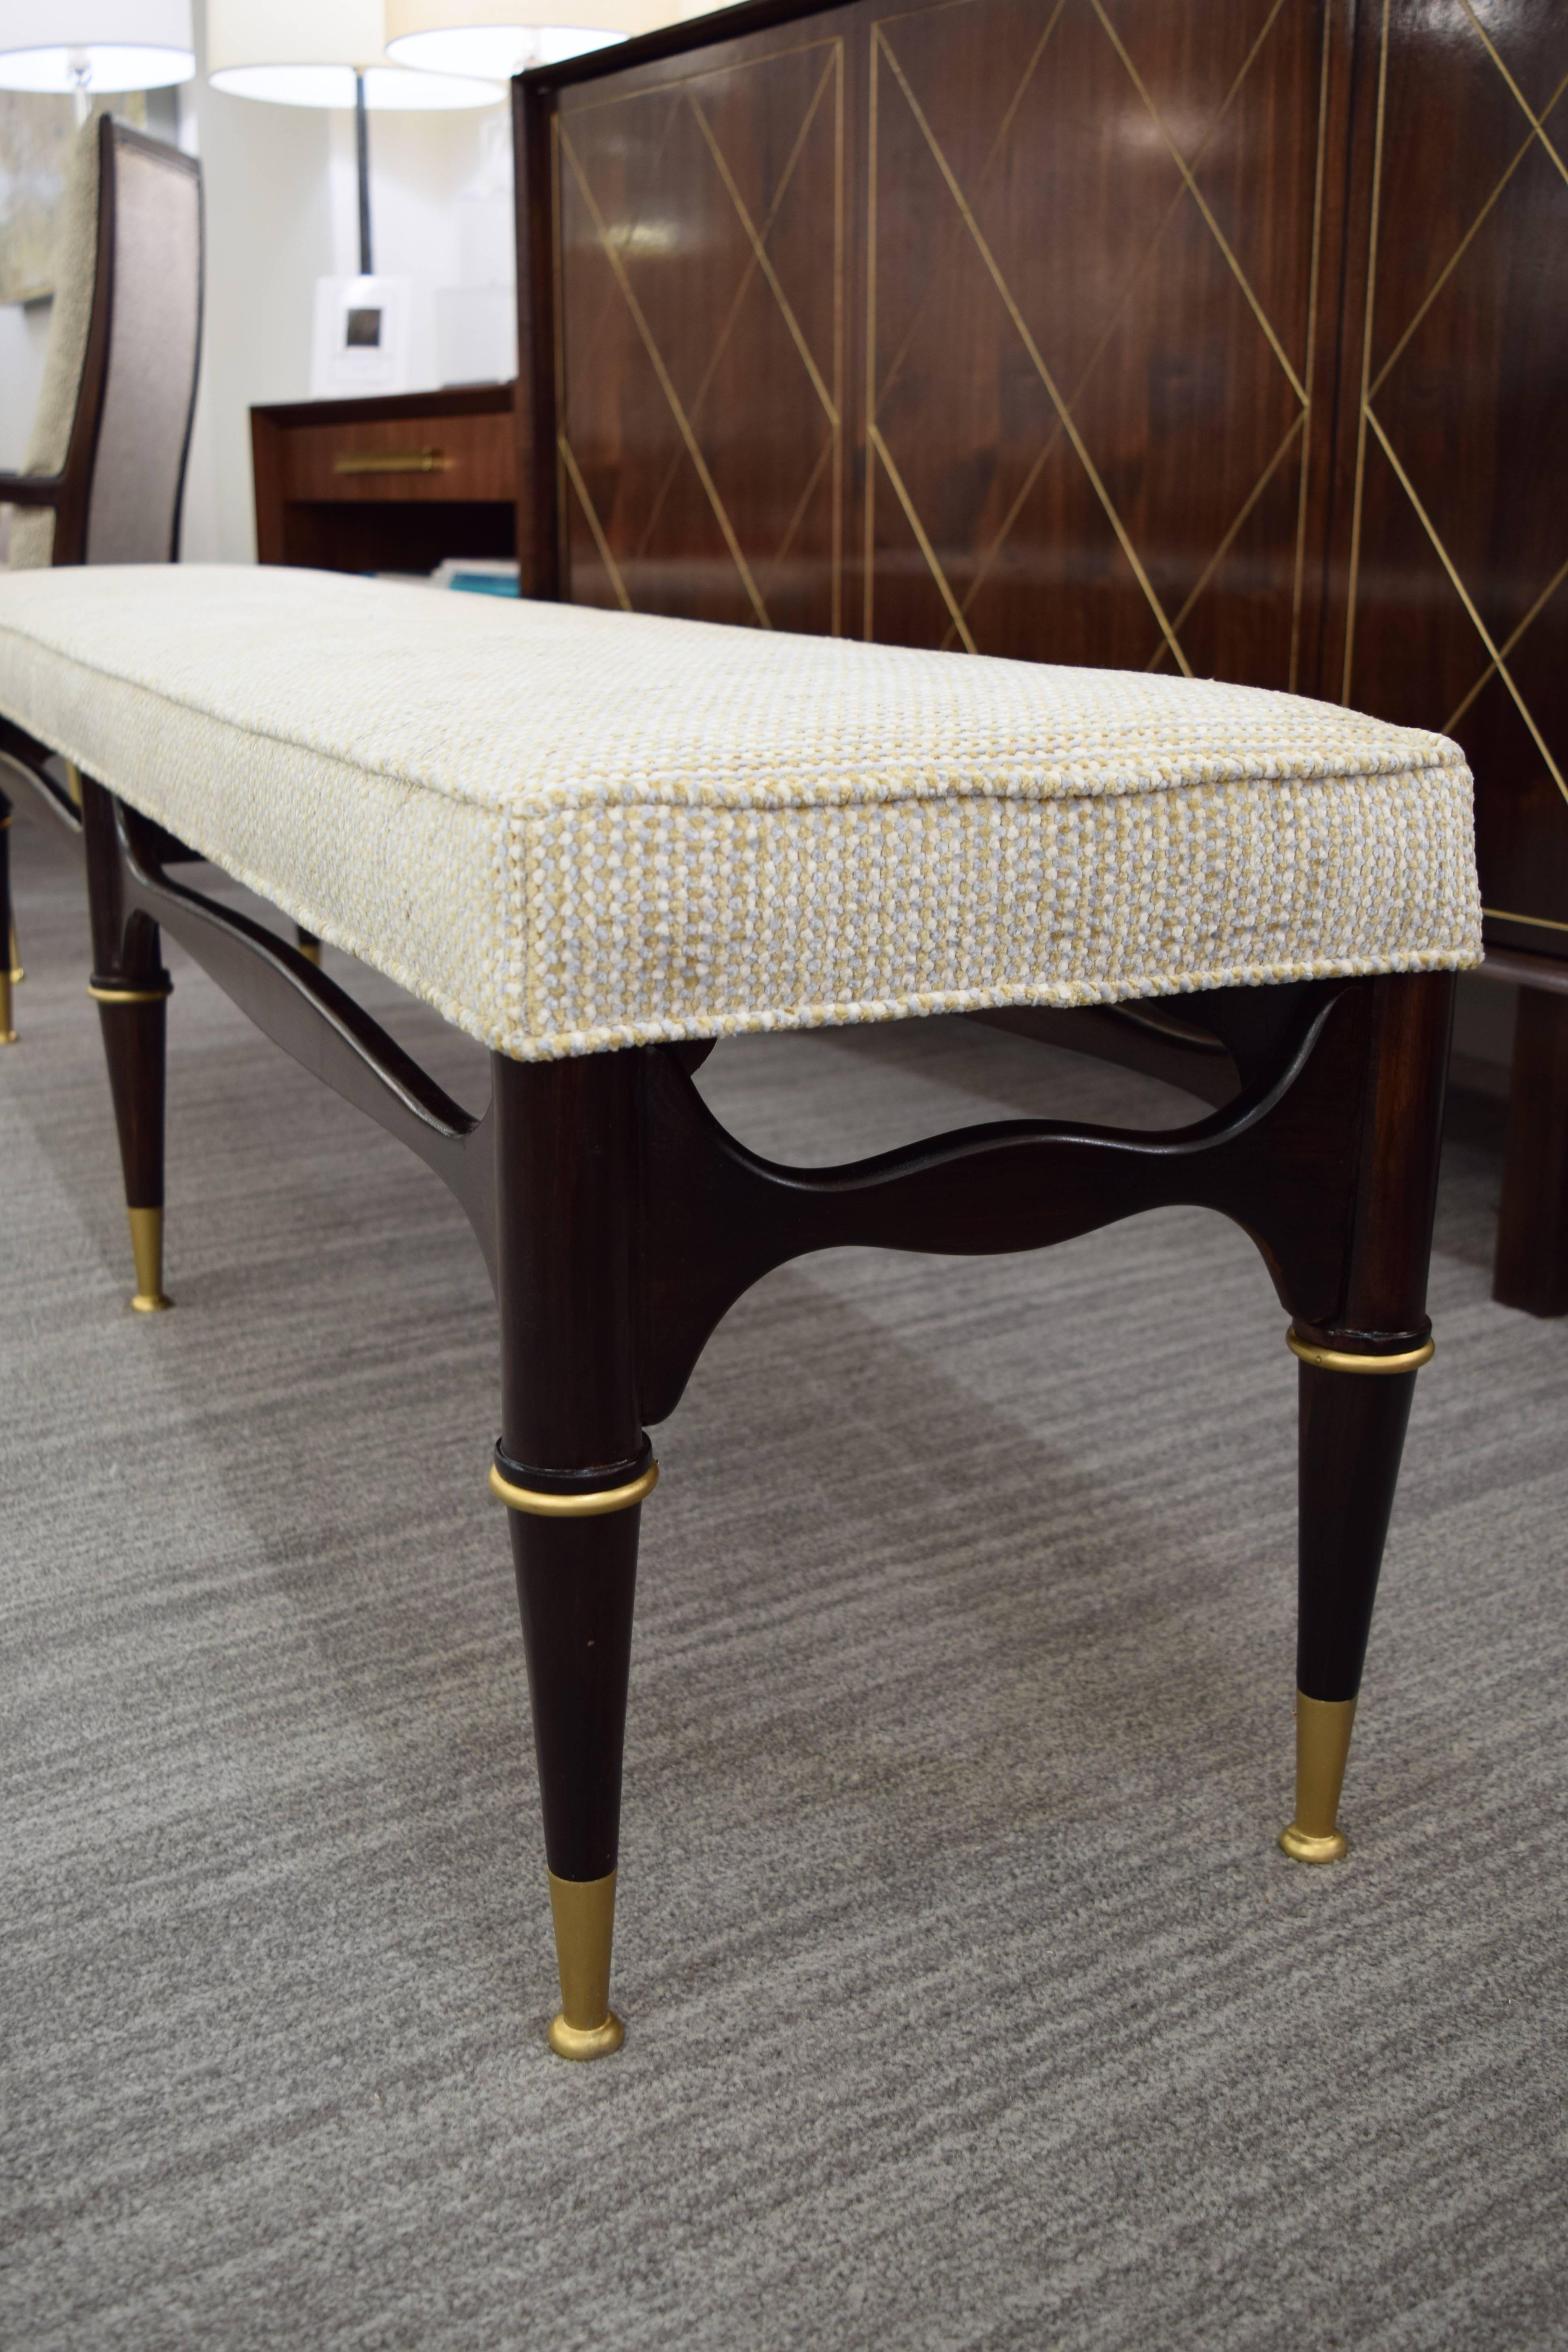 Geo Ponti inspired sculptural  6 leg bench iwth brass accents.  Walnut wood refinished to a deep brown semi gloss fabric.  Topped with neutral chenille with welting details.  